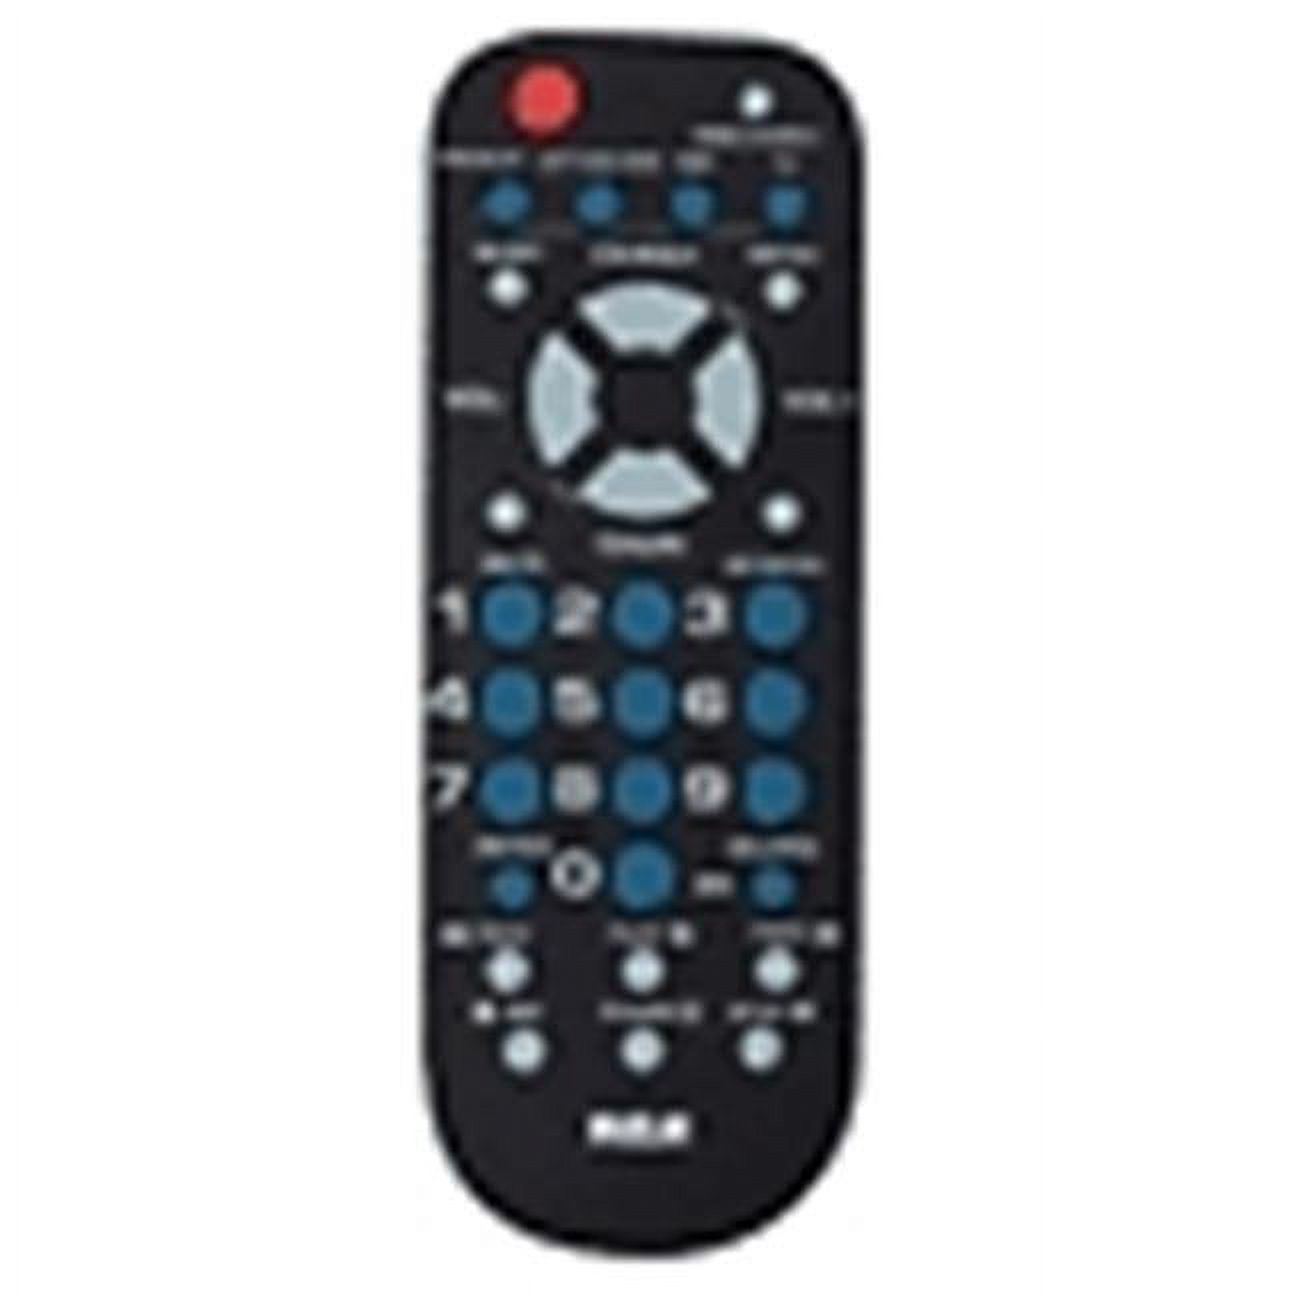 RCA Rcr504be 4-device Palm-sized Universal Remote - image 1 of 3